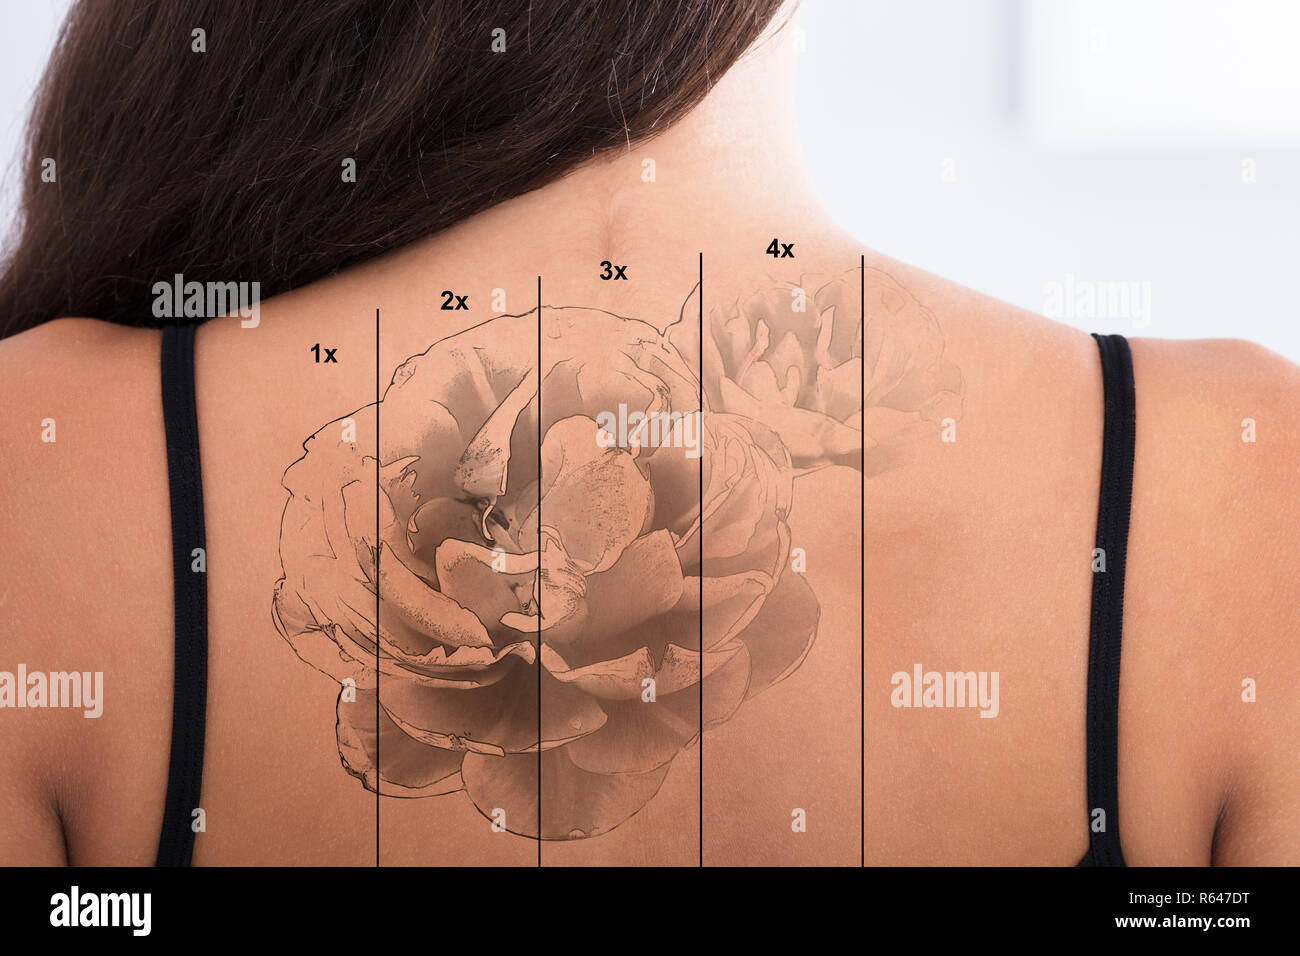 Tattoo Removal - Dr. Colin Hong